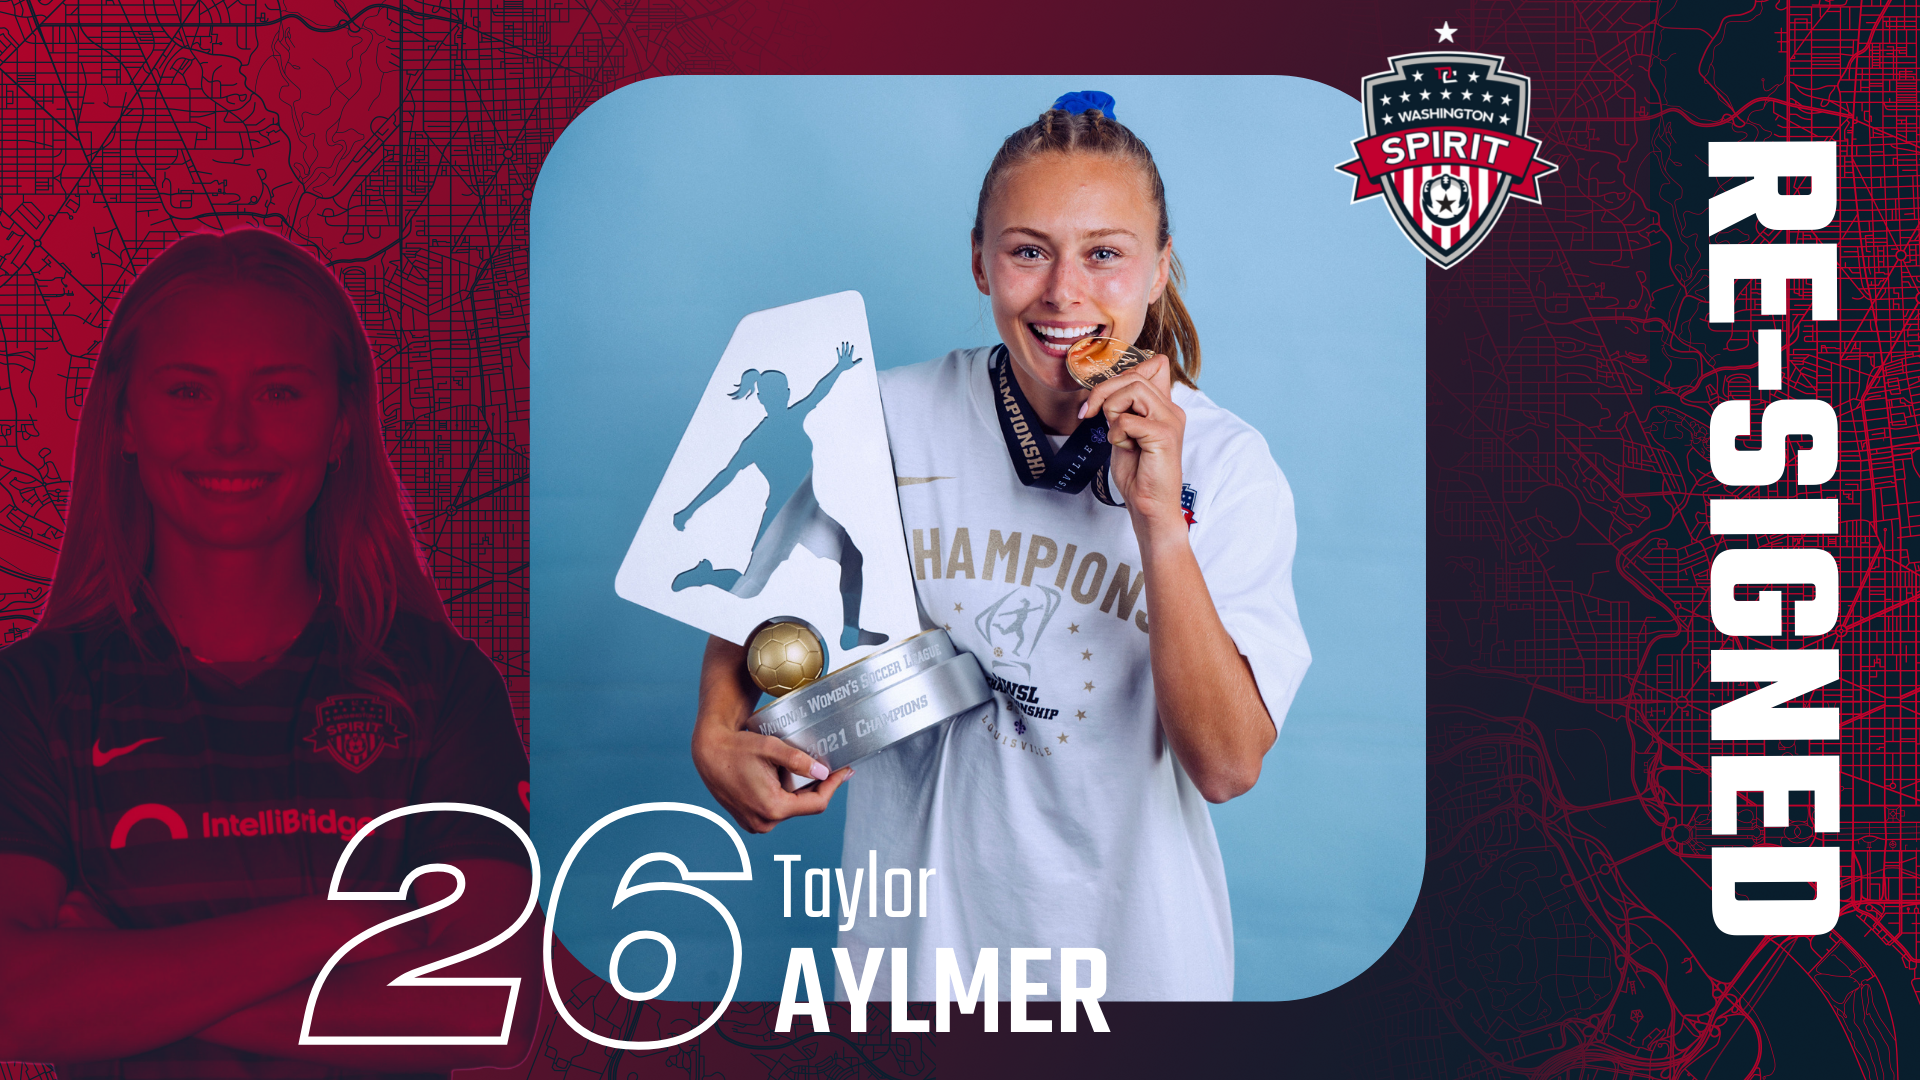 Washington Spirit Re-Sign Midfielder Taylor Aylmer to New Contract Featured Image